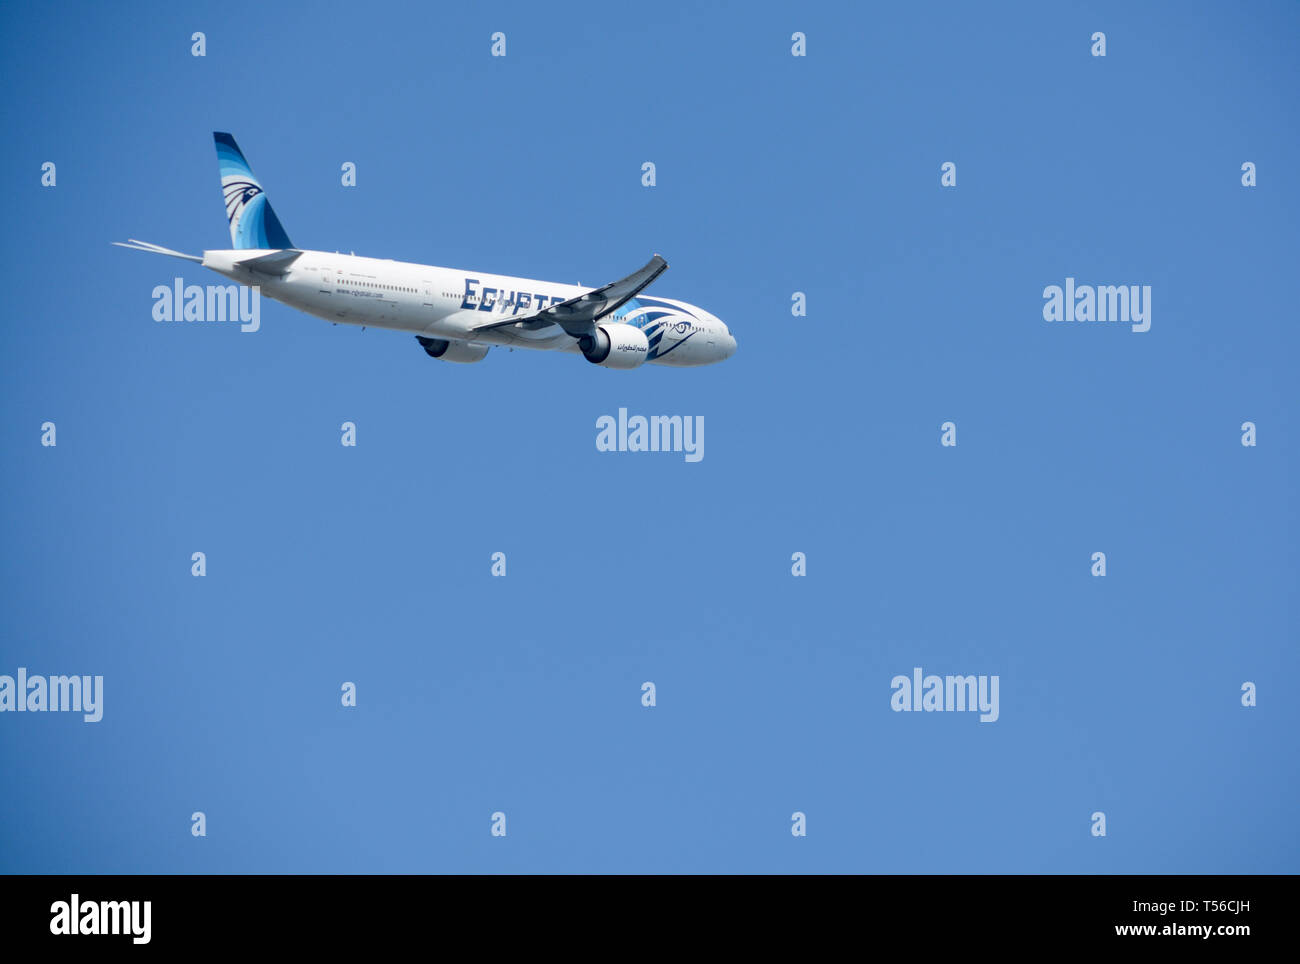 A low-flying EgyptAir jet plane taking off from London Heathrow Airport, UK Stock Photo